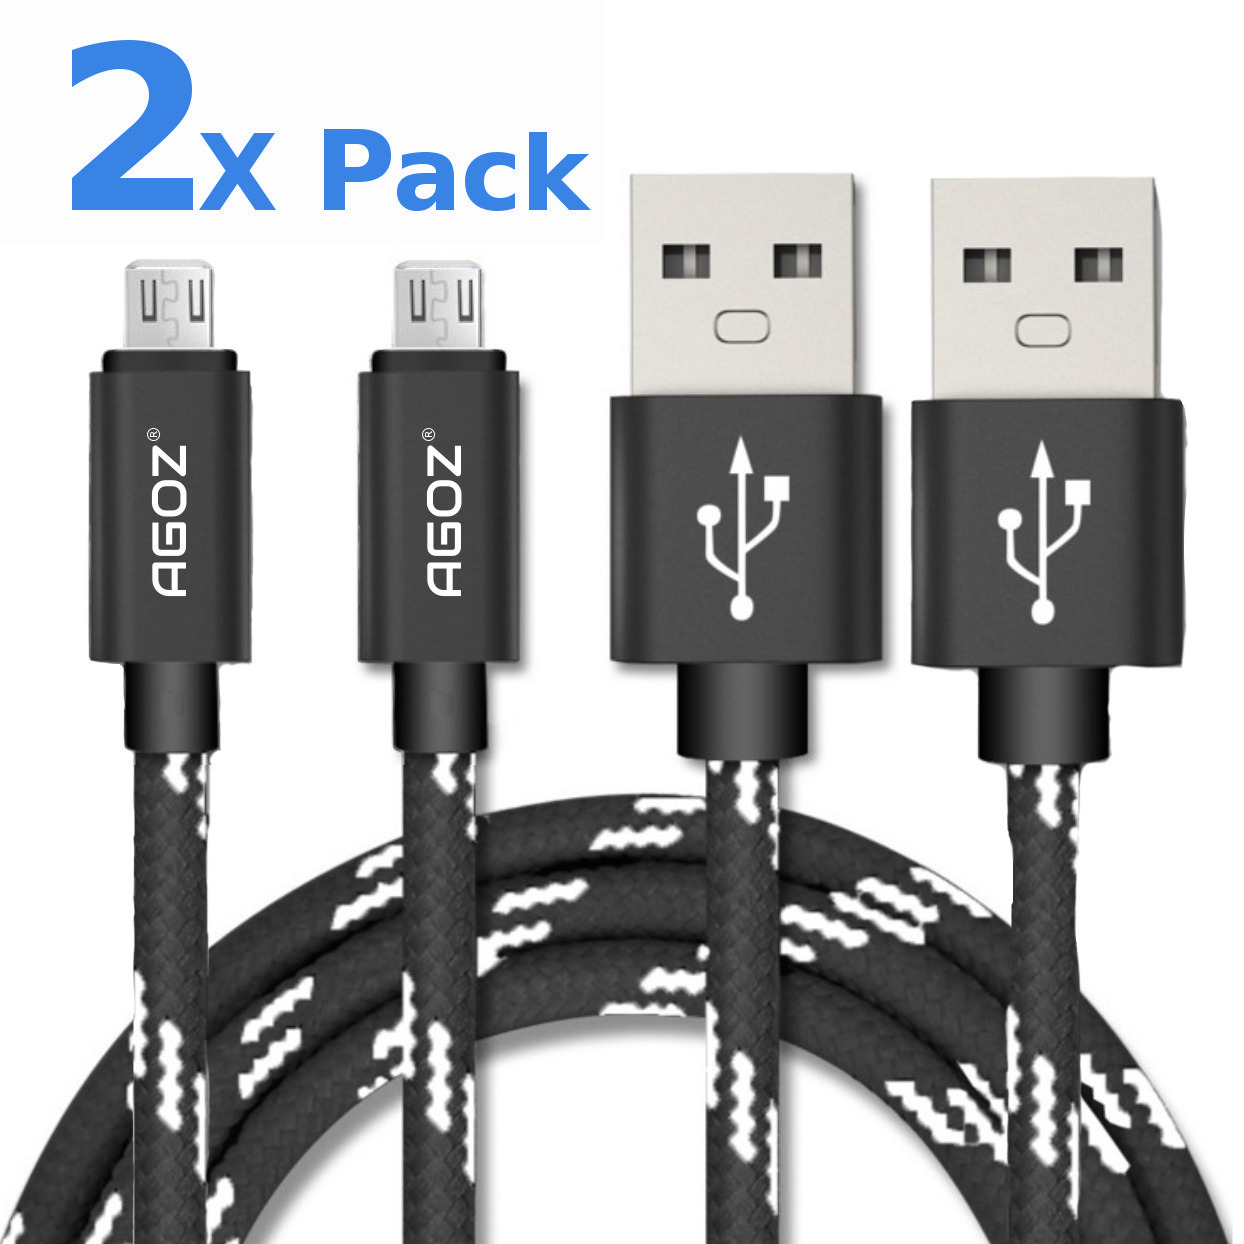 Pack 6ft Agoz Micro USB FAST Charger Cable for Motorola Talkabout T600  T631 T605 T800 T200 T200TP T260 T260TP T265 T280 T400 T402 T460 T465 T480  Portable Handheld Two-way Radio Walkie